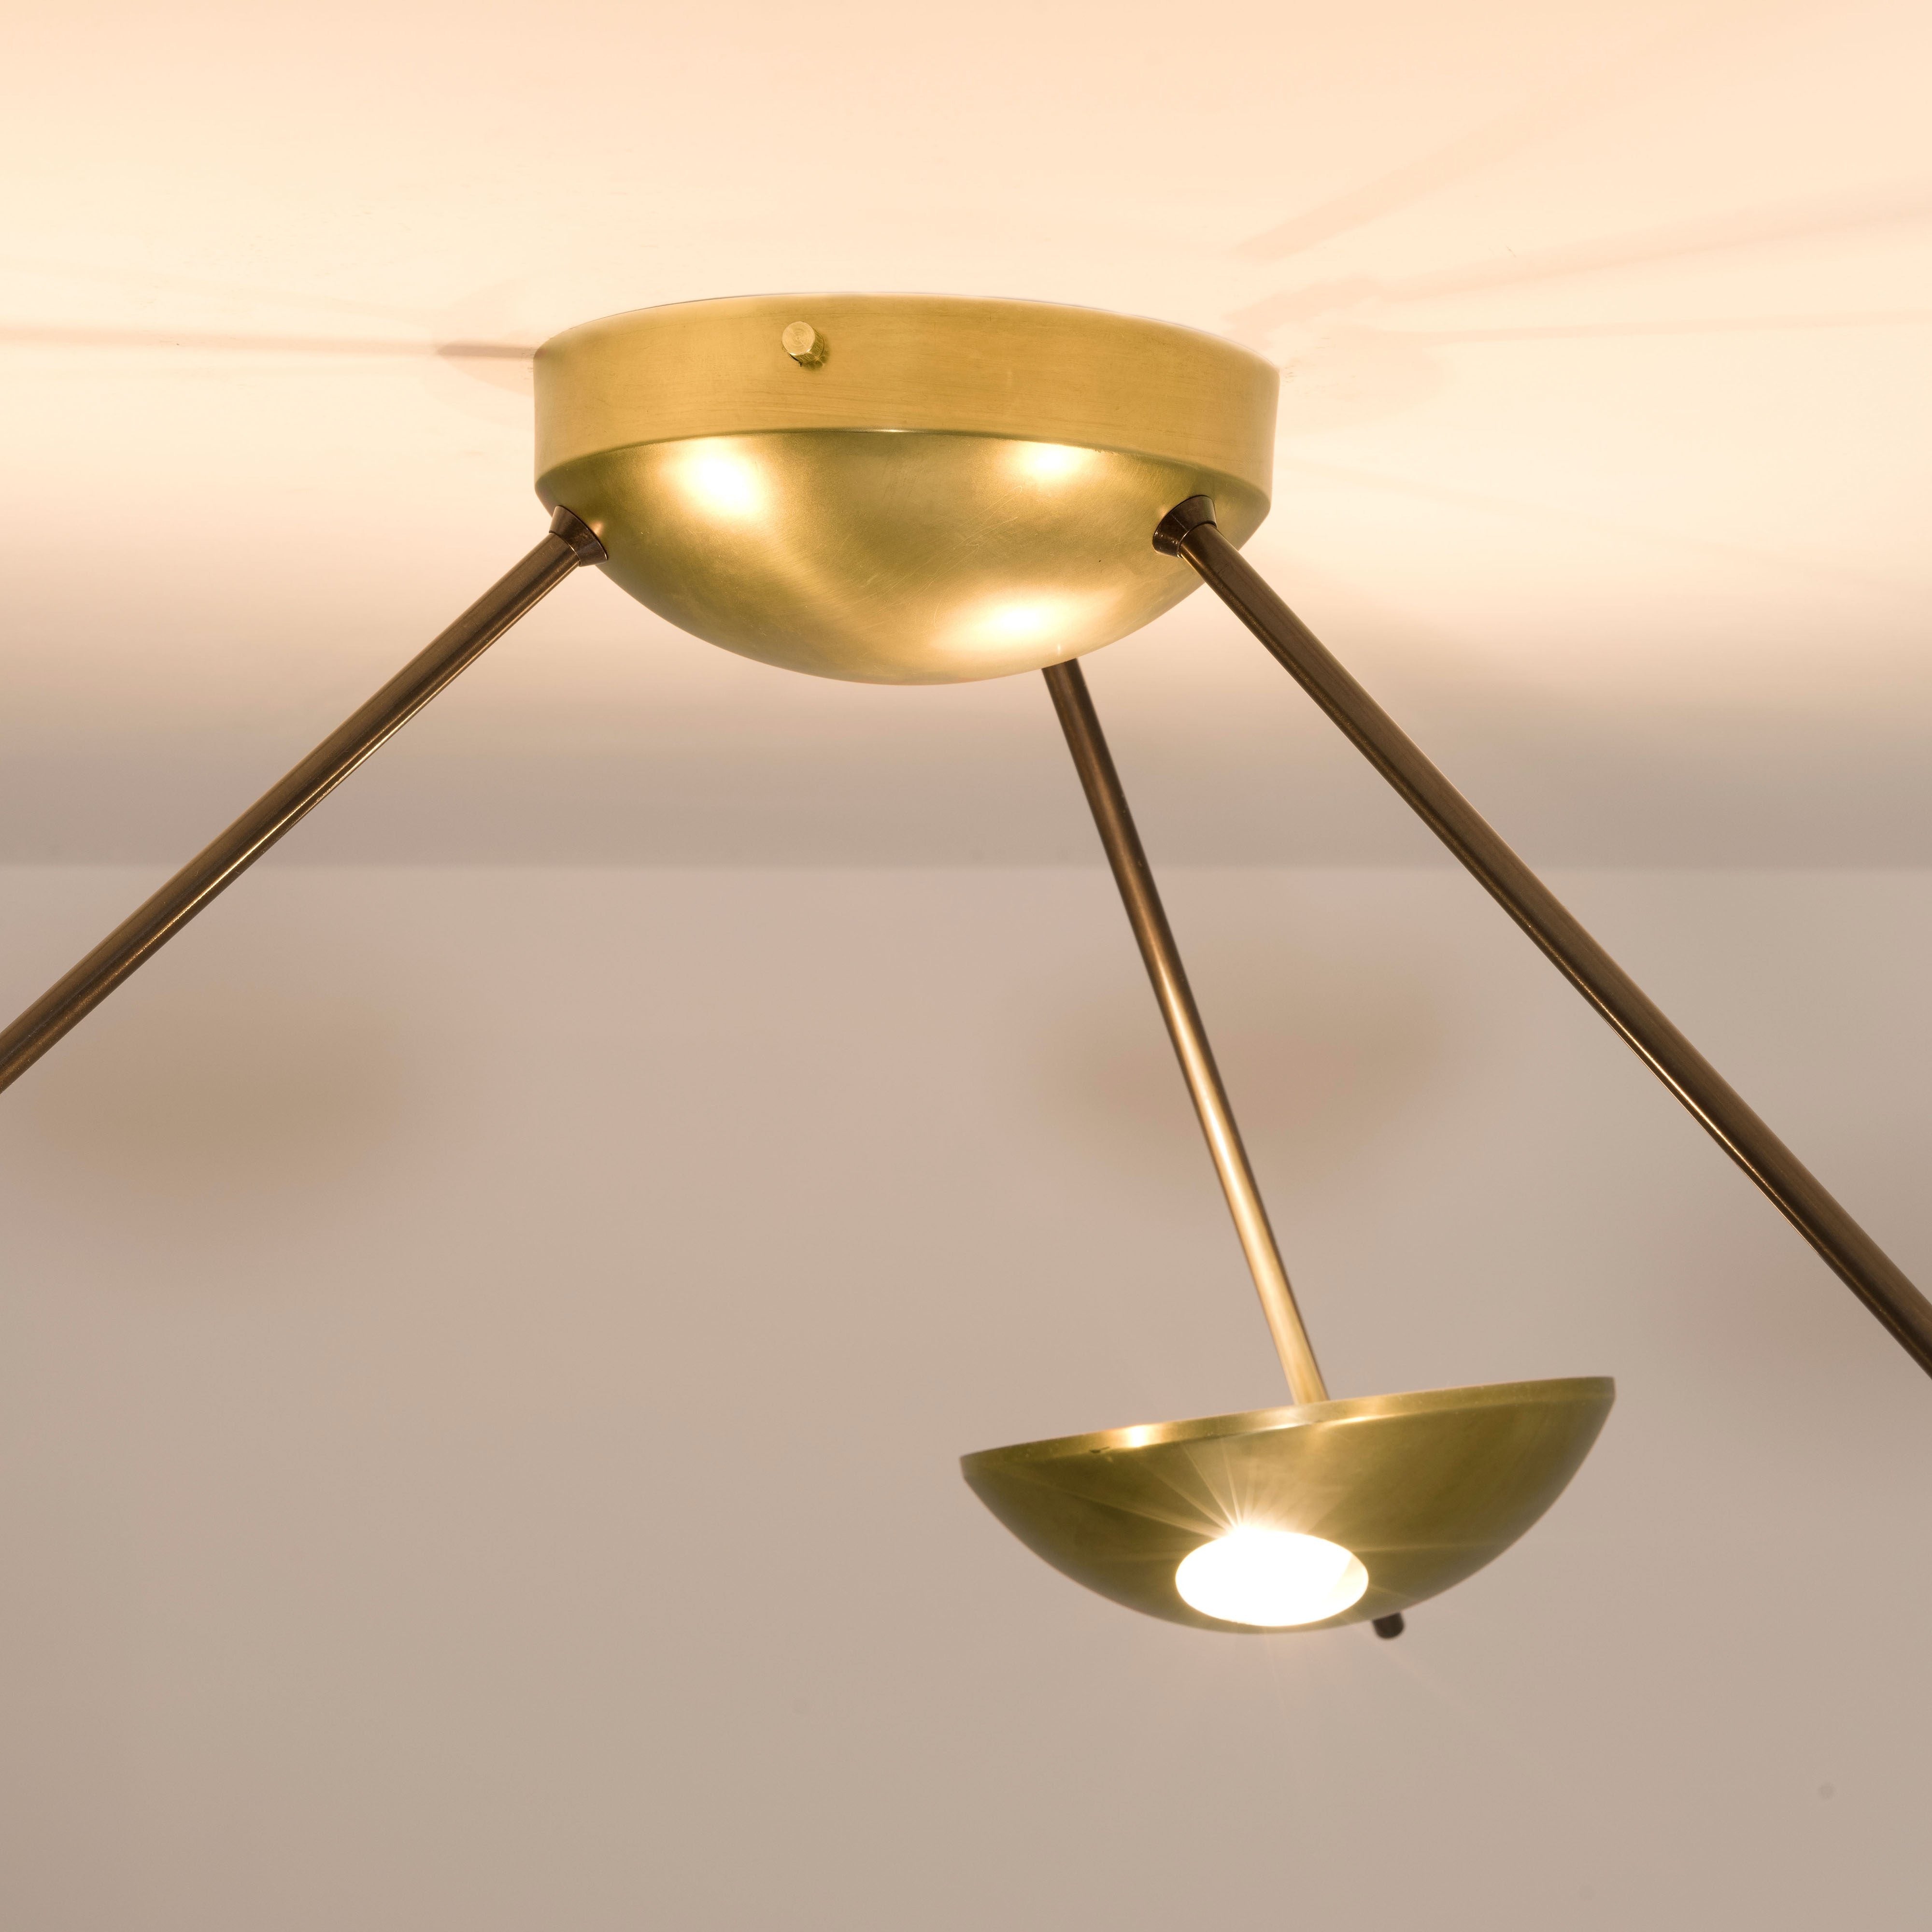 Tribus II is completely handmade, representing, like all DFM production pieces, the excellence of Italian-made craftsmanship. It can be mounted both as a ceiling and a wall lamp.